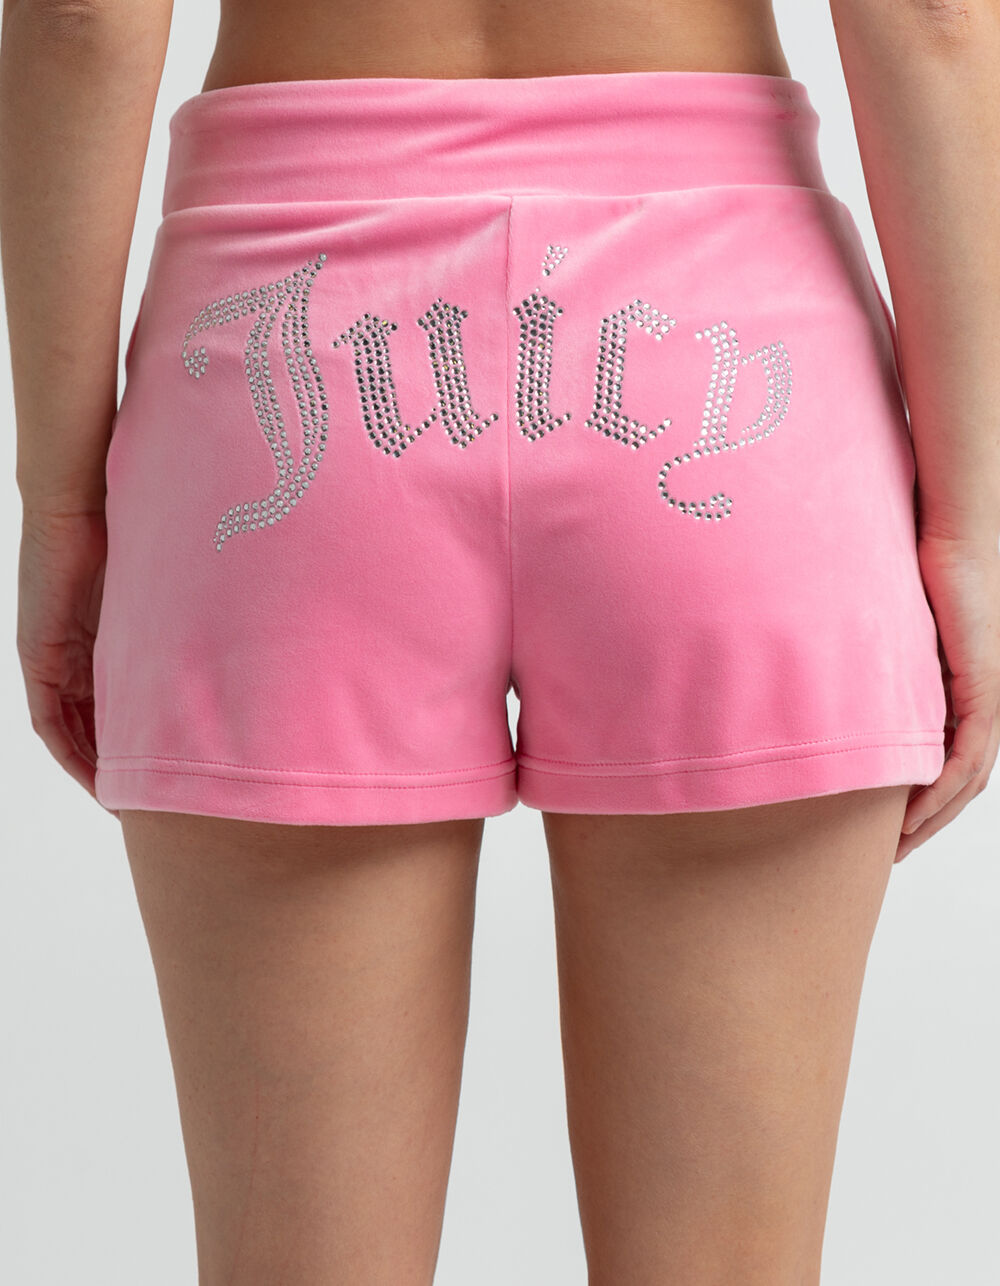 JUICY COUTURE Womens Velour Bling Shorts - HOT PINK